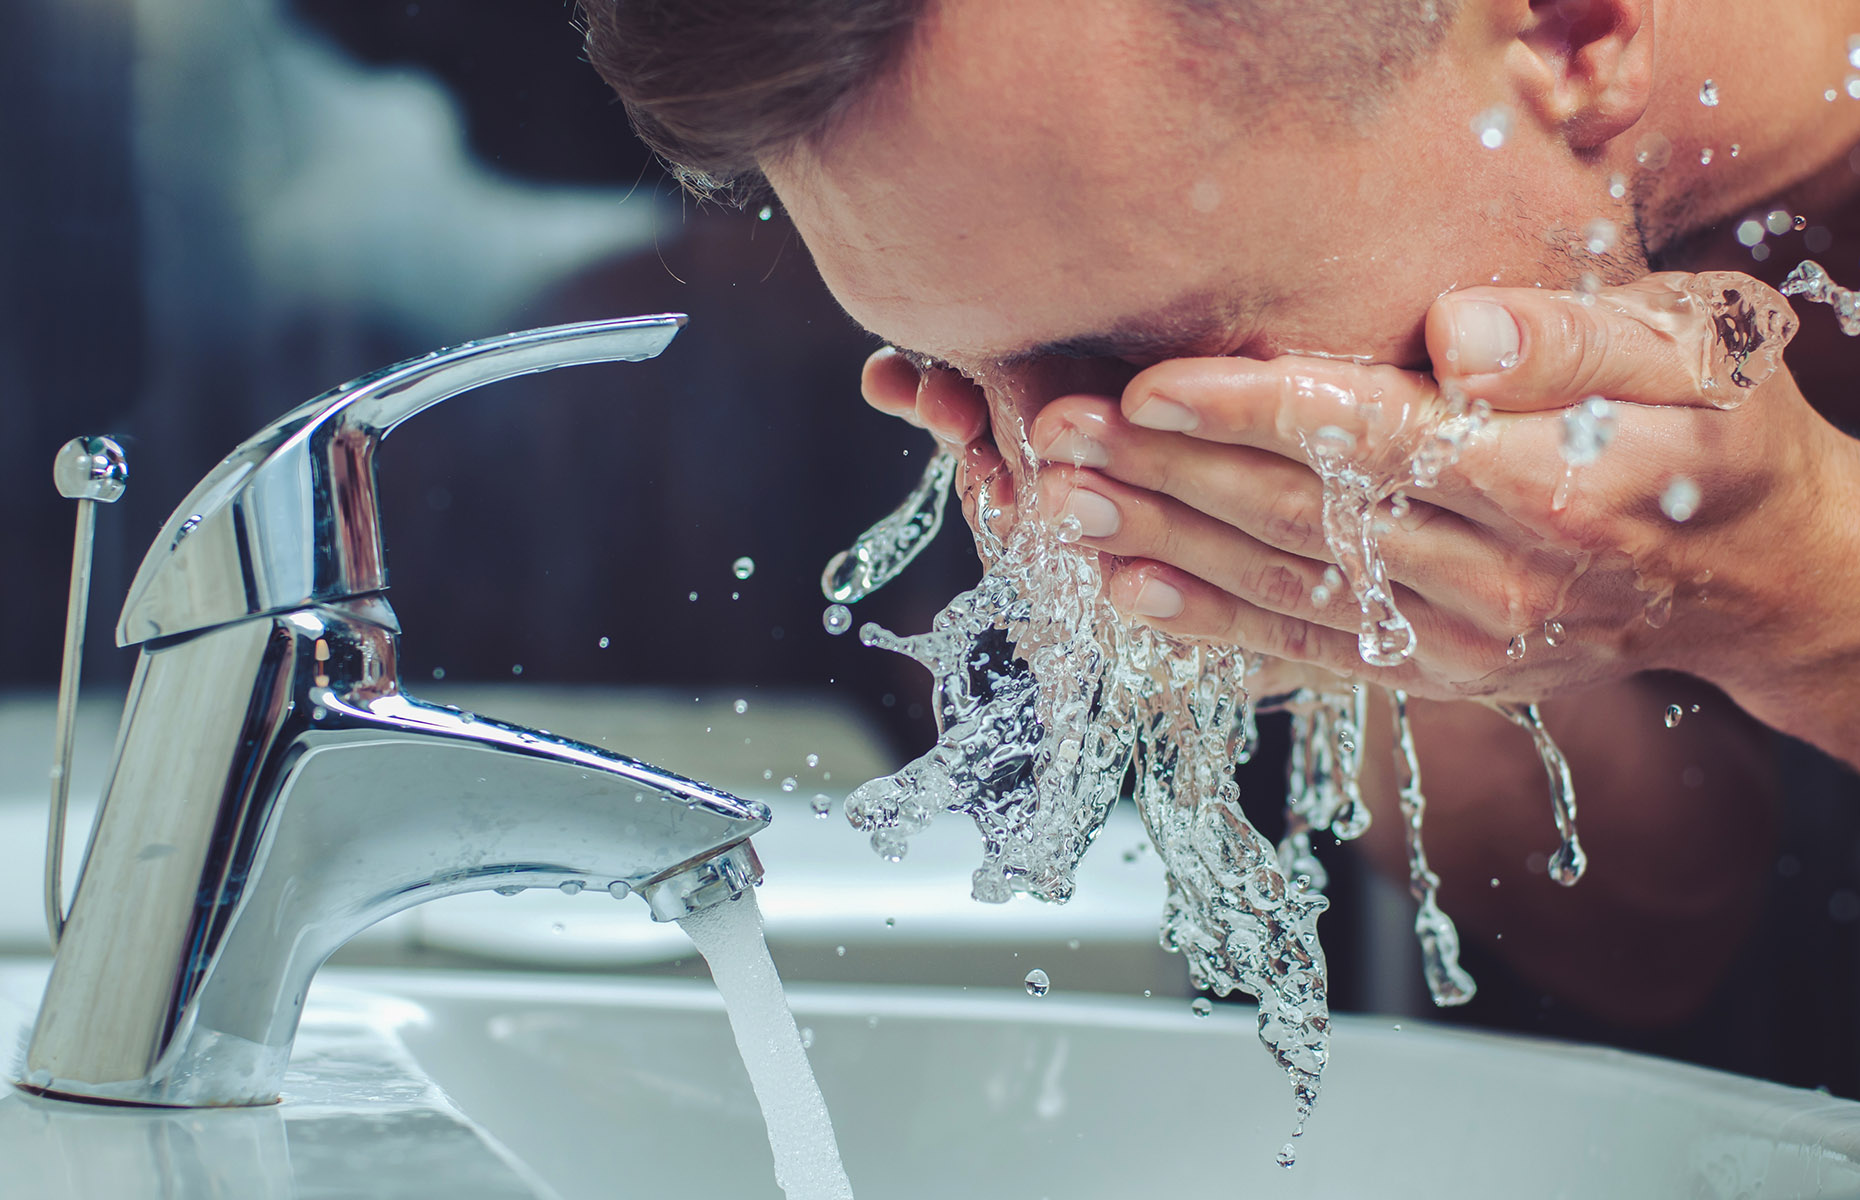 Man washing face (Image: George Rudy/Shutterstock)